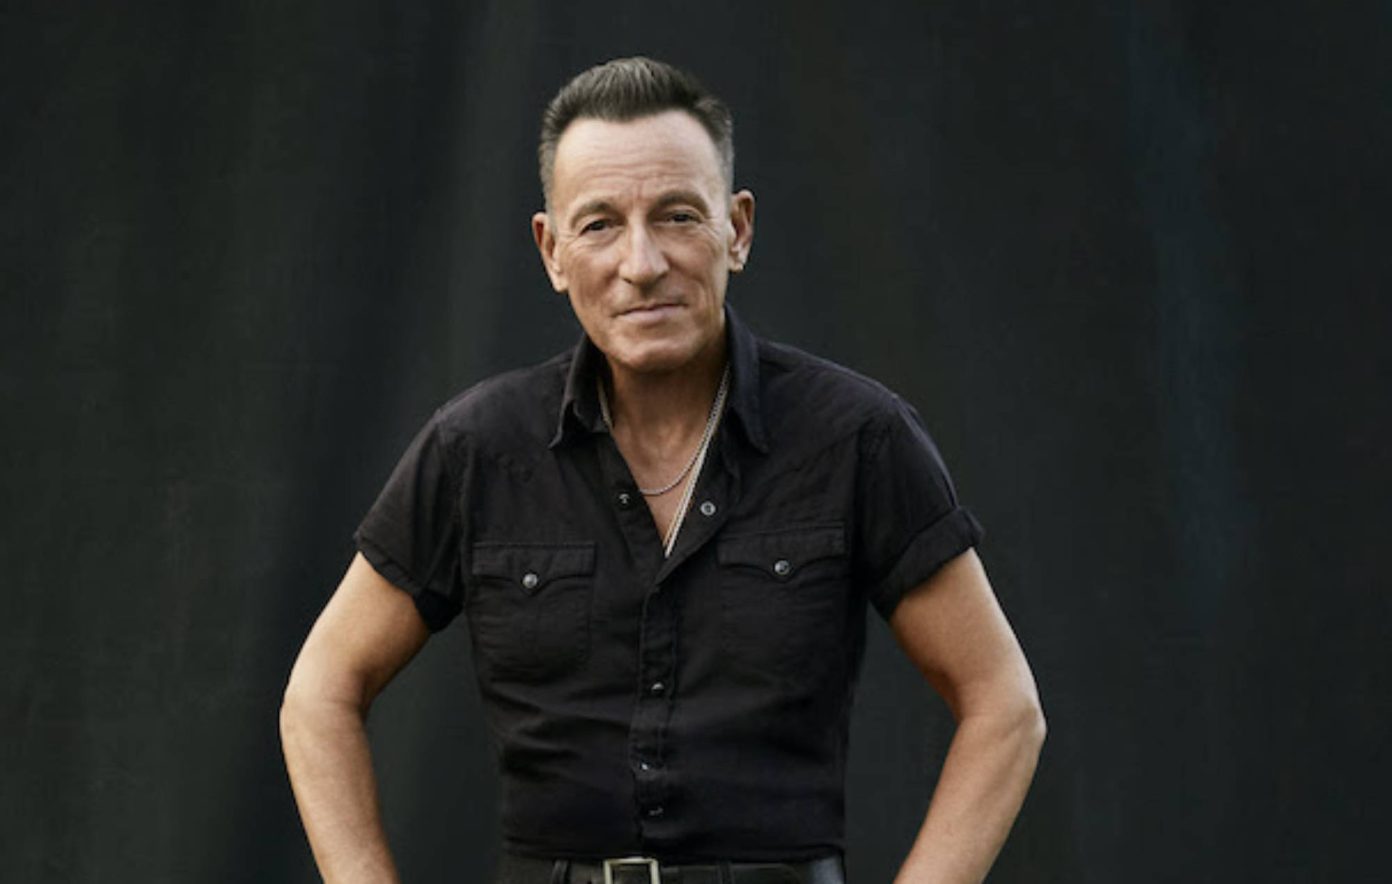 Bruce Springsteen returns to Montreal's Bell Centre this November (on